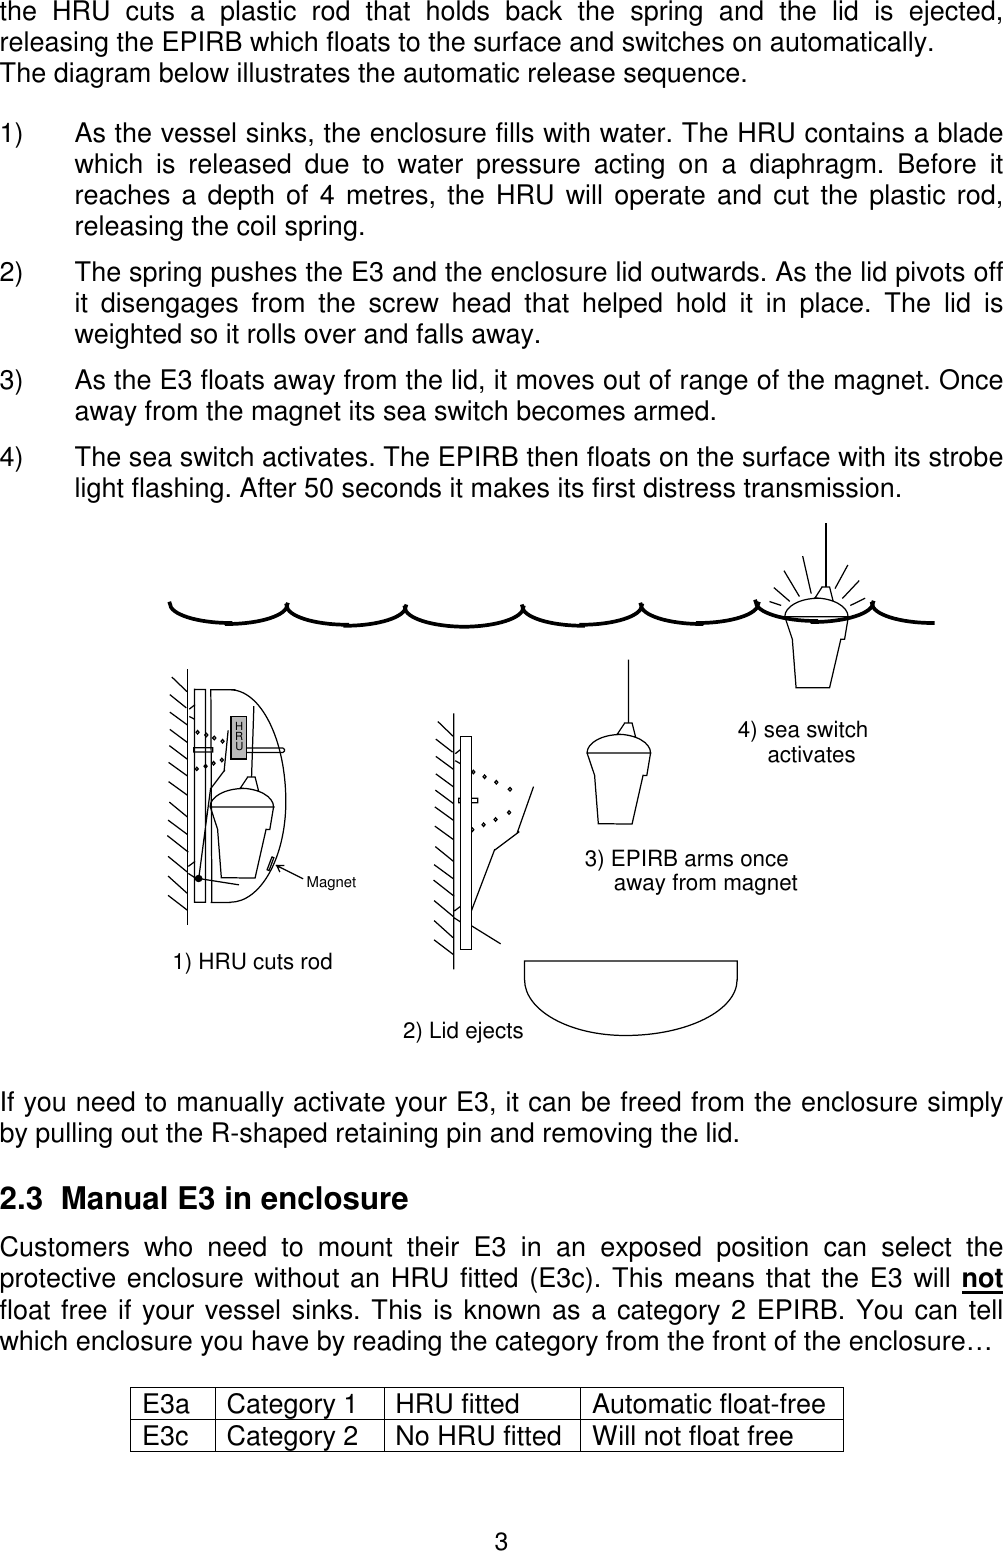 3the HRU cuts a plastic rod that holds back the spring and the lid is ejected,releasing the EPIRB which floats to the surface and switches on automatically.The diagram below illustrates the automatic release sequence.1)  As the vessel sinks, the enclosure fills with water. The HRU contains a bladewhich is released due to water pressure acting on a diaphragm. Before itreaches a depth of 4 metres, the HRU will operate and cut the plastic rod,releasing the coil spring.2)  The spring pushes the E3 and the enclosure lid outwards. As the lid pivots offit disengages from the screw head that helped hold it in place. The lid isweighted so it rolls over and falls away.3)  As the E3 floats away from the lid, it moves out of range of the magnet. Onceaway from the magnet its sea switch becomes armed.4)  The sea switch activates. The EPIRB then floats on the surface with its strobelight flashing. After 50 seconds it makes its first distress transmission.If you need to manually activate your E3, it can be freed from the enclosure simplyby pulling out the R-shaped retaining pin and removing the lid.2.3  Manual E3 in enclosureCustomers who need to mount their E3 in an exposed position can select theprotective enclosure without an HRU fitted (E3c). This means that the E3 will notfloat free if your vessel sinks. This is known as a category 2 EPIRB. You can tellwhich enclosure you have by reading the category from the front of the enclosure…E3a Category 1 HRU fitted Automatic float-freeE3c Category 2 No HRU fitted Will not float freeHRU1) HRU cuts rod2) Lid ejects4) sea switch activates3) EPIRB arms onceaway from magnetMagnet